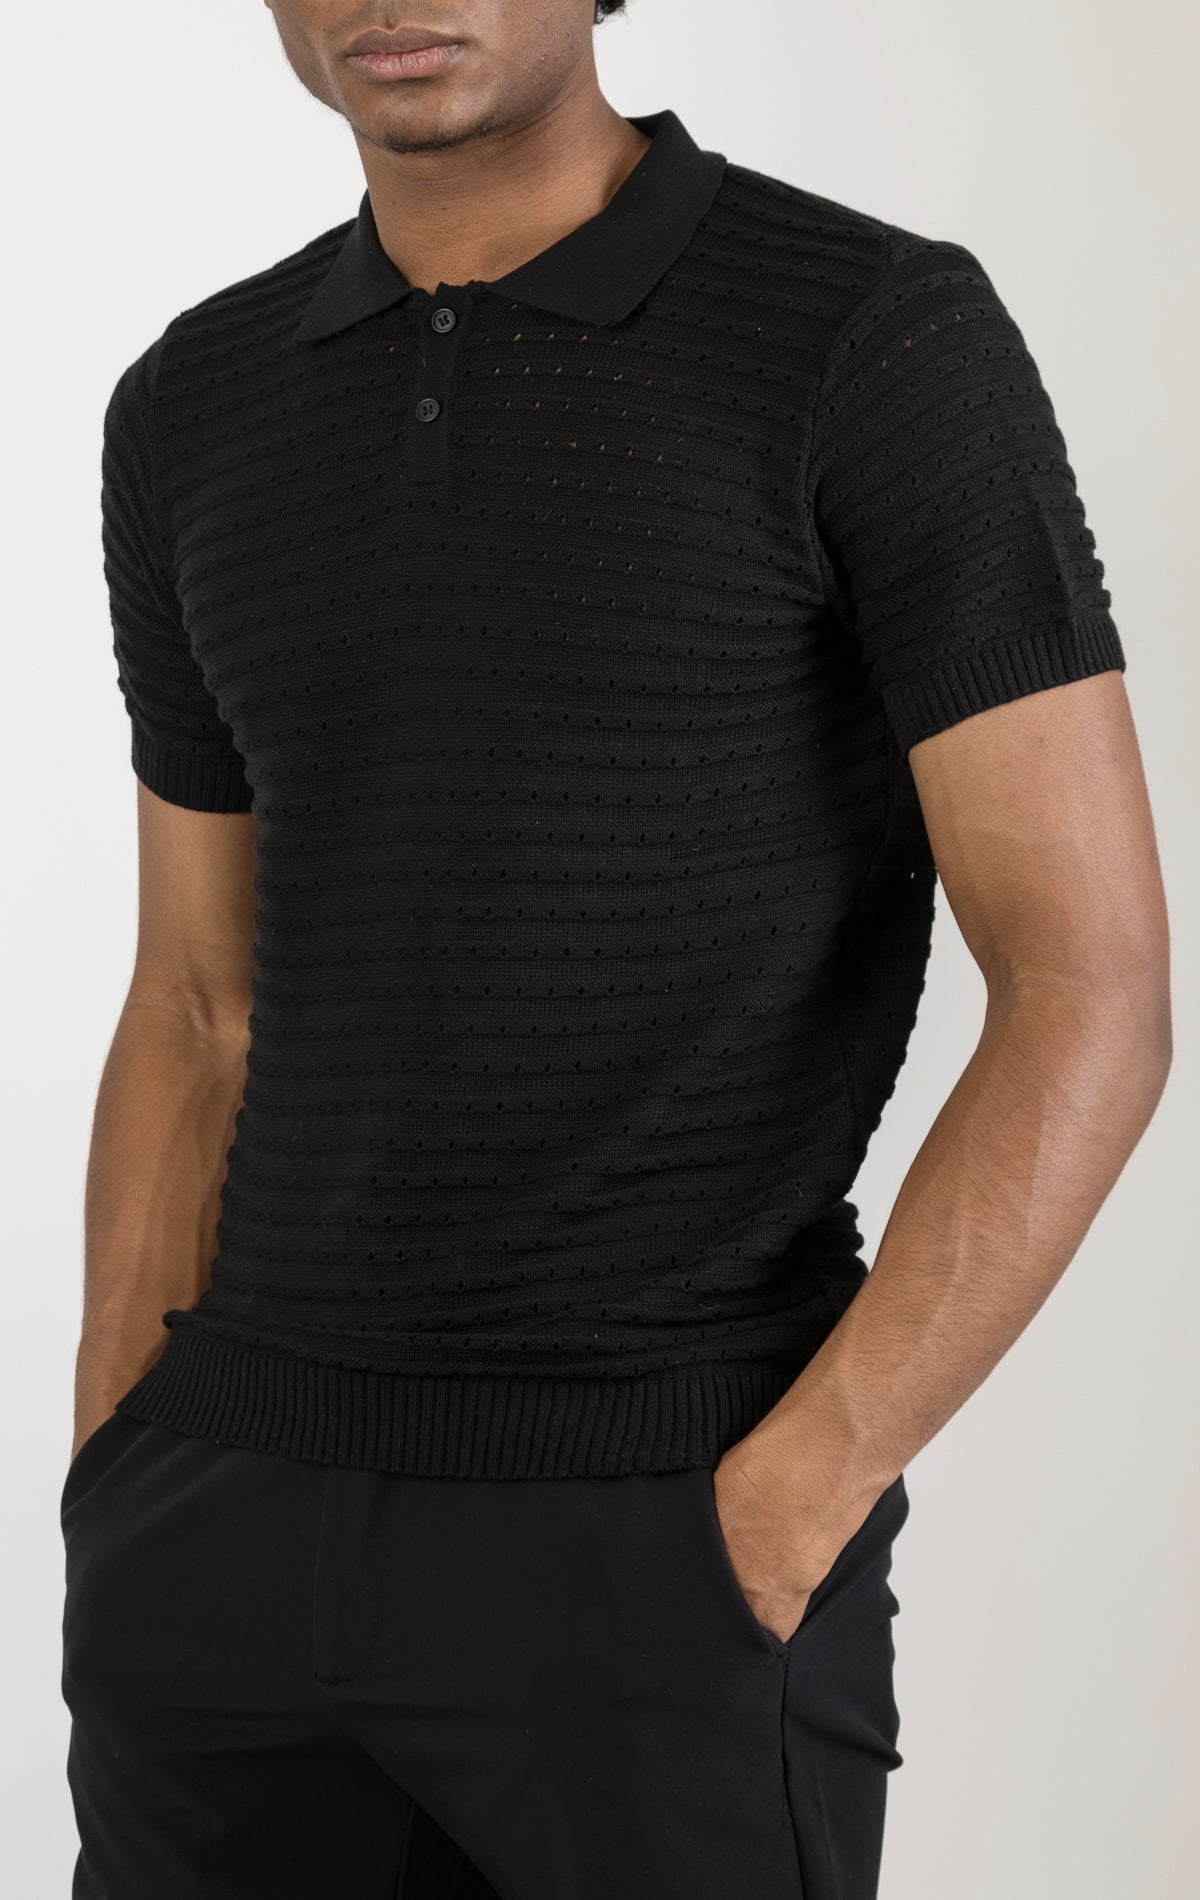 Men's eyelet short sleeve polo tee in Black . The shirt is made from a soft and breathable fabric (50% viscose, 50% polyamide) and features a classic polo collar, short sleeves, and delicate eyelet detailing along the sleeves.